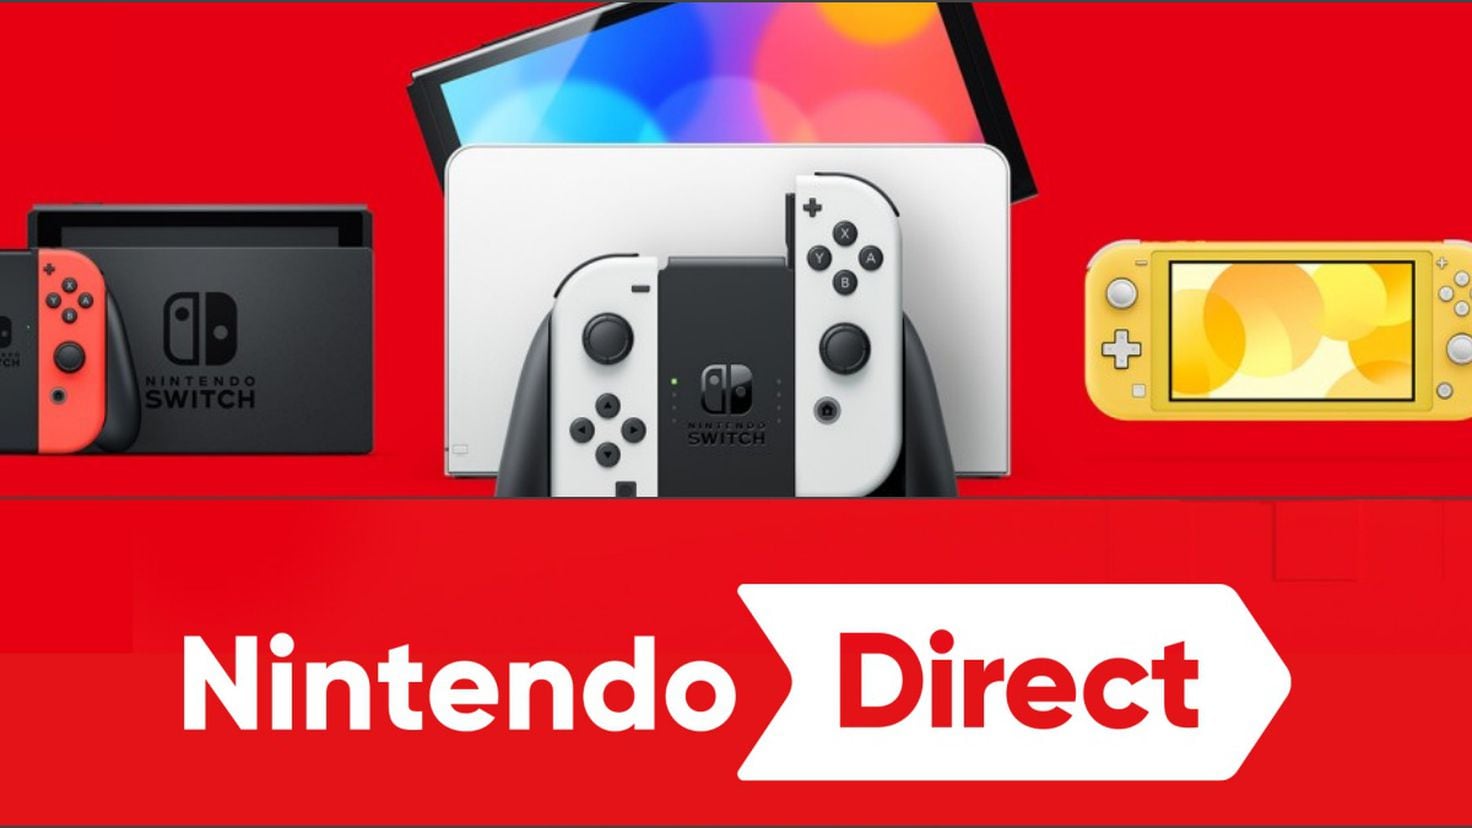 How to watch the Nintendo Direct September 2023 event